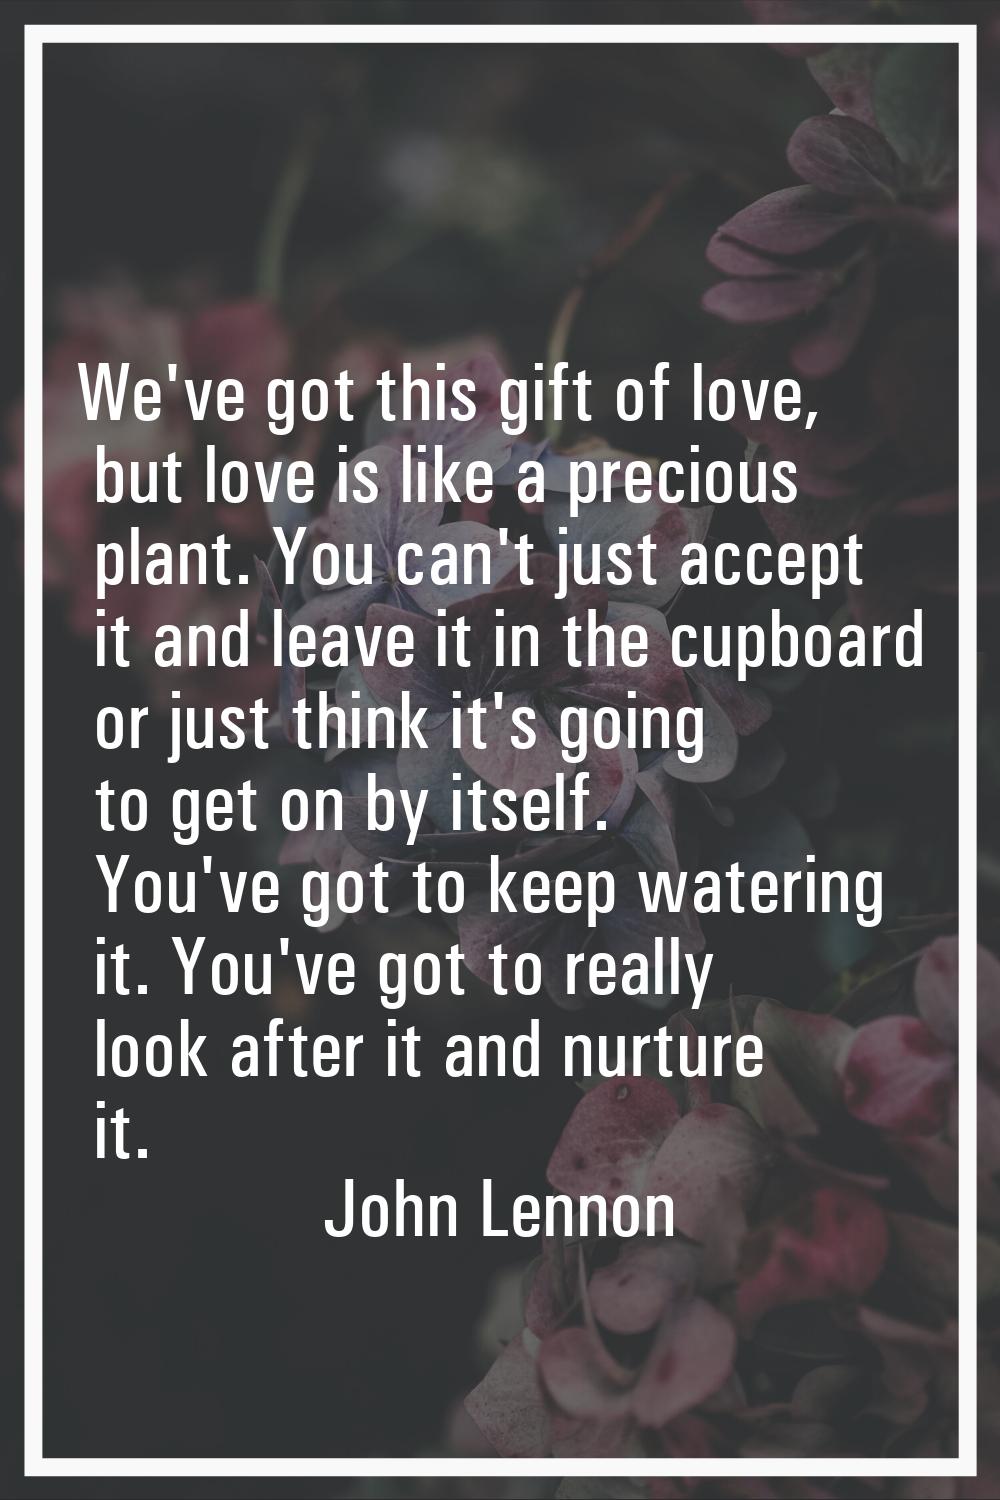 We've got this gift of love, but love is like a precious plant. You can't just accept it and leave 